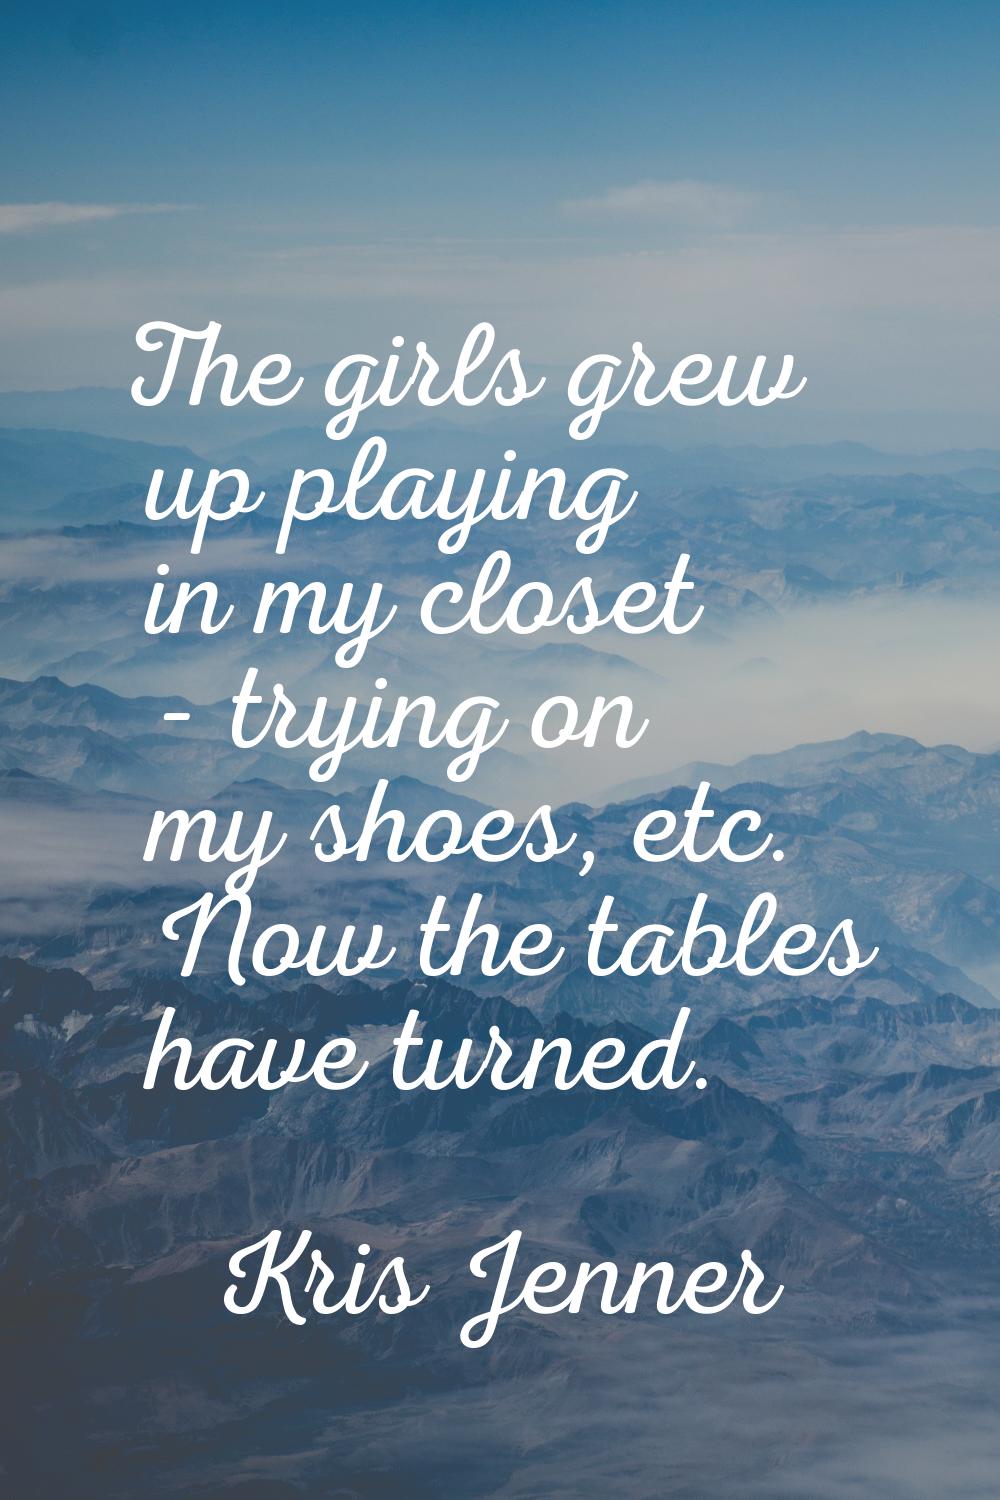 The girls grew up playing in my closet - trying on my shoes, etc. Now the tables have turned.